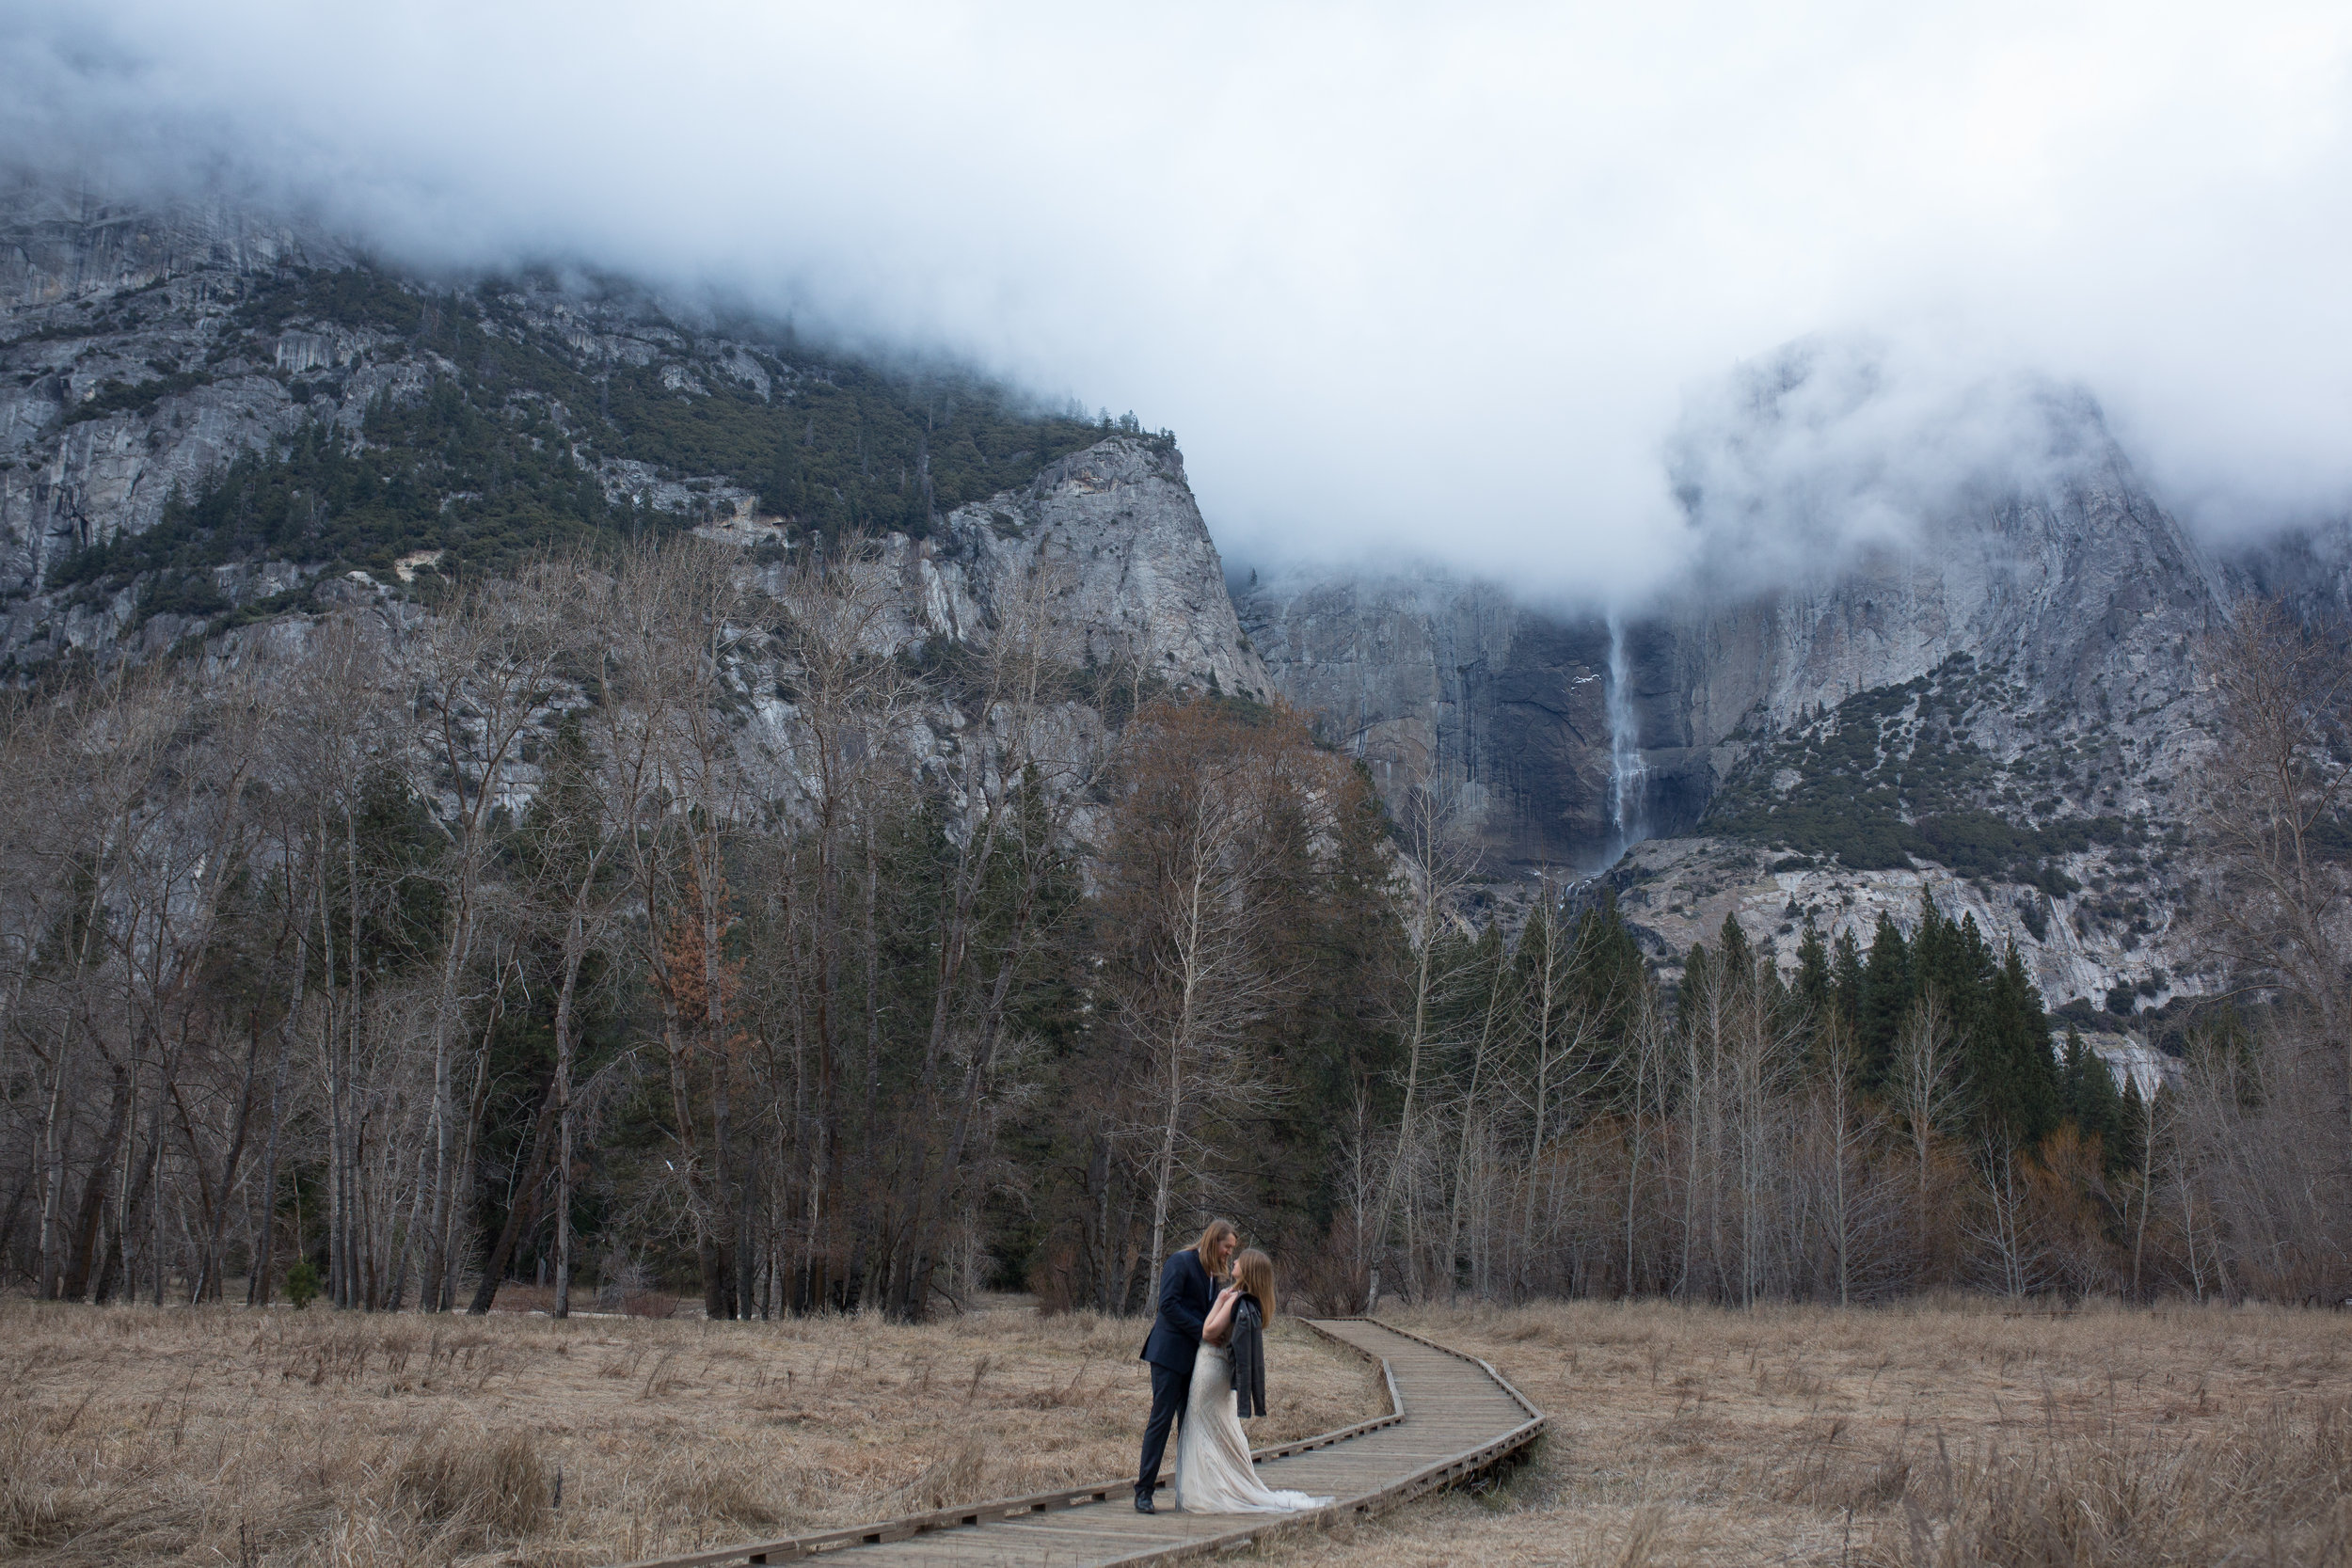 nicole-daacke-photography-yousemite-national-park-elopement-photographer-winter-cloud-moody-elope-inspiration-yosemite-valley-tunnel-view-winter-cloud-fog-weather-wedding-photos-93.jpg